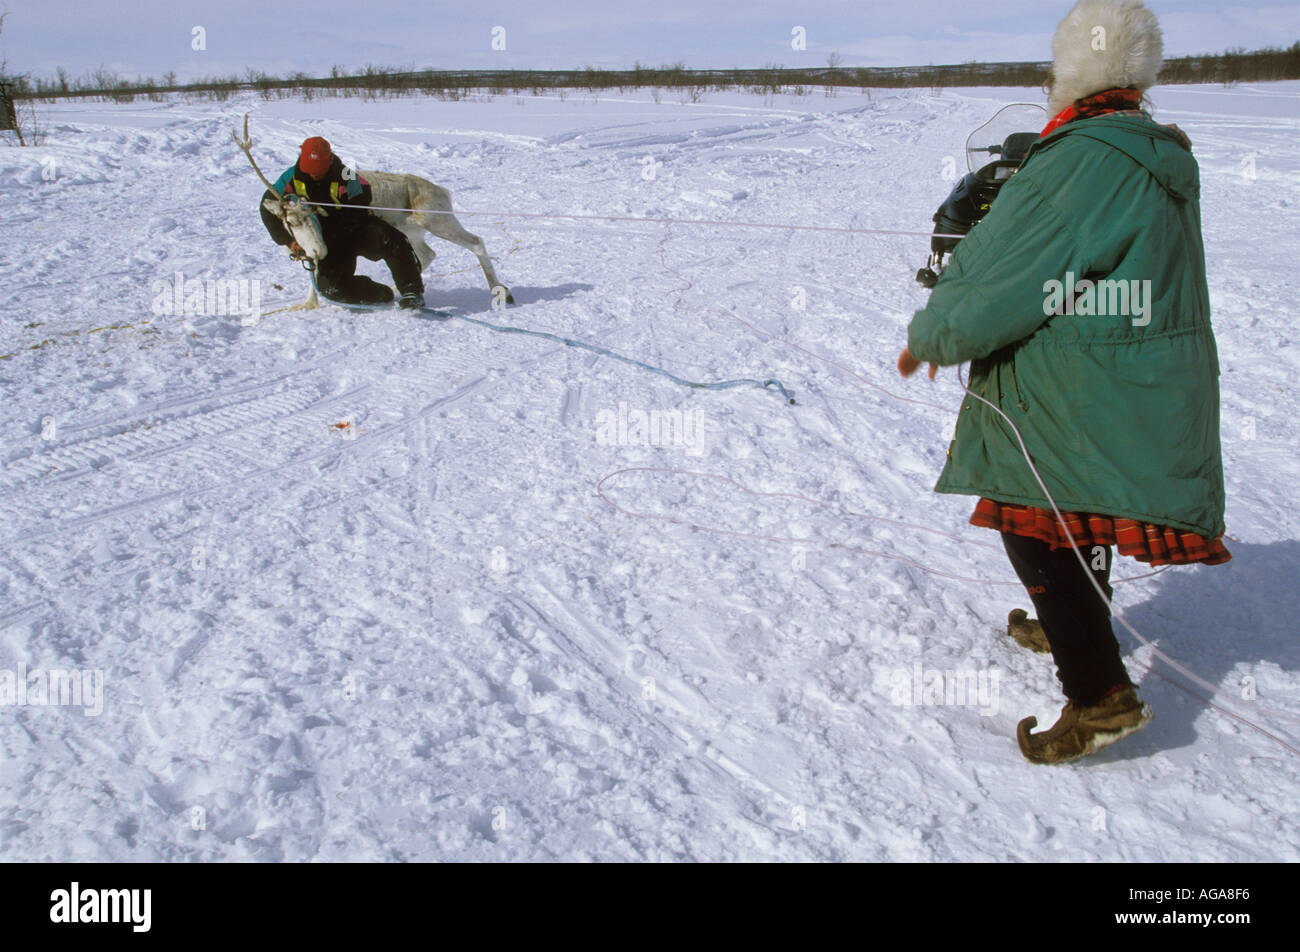 A Saami woman and man catch a reindeeer bull with a lasso,  Kautokeino area, Norway. Stock Photo